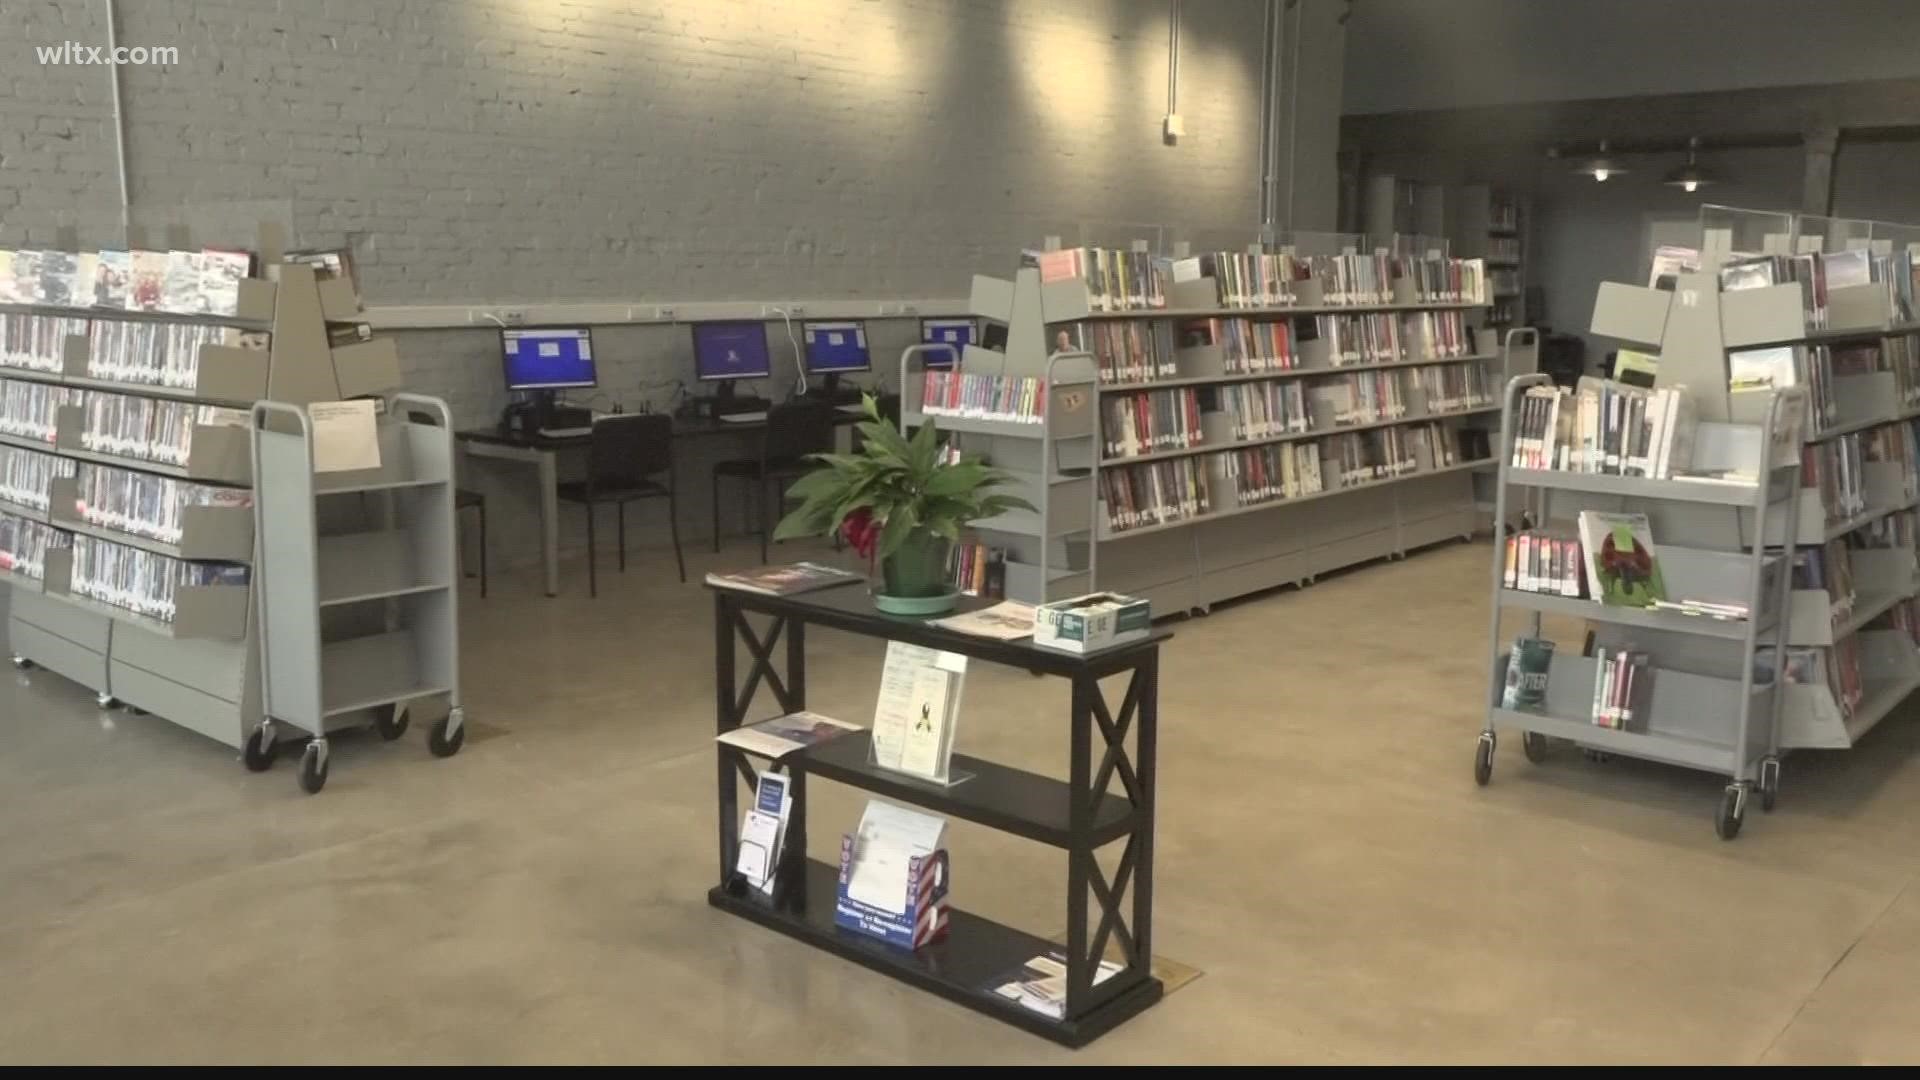 The new space is a renovated an abandoned warehouse in 2017 to serve as as the new library.